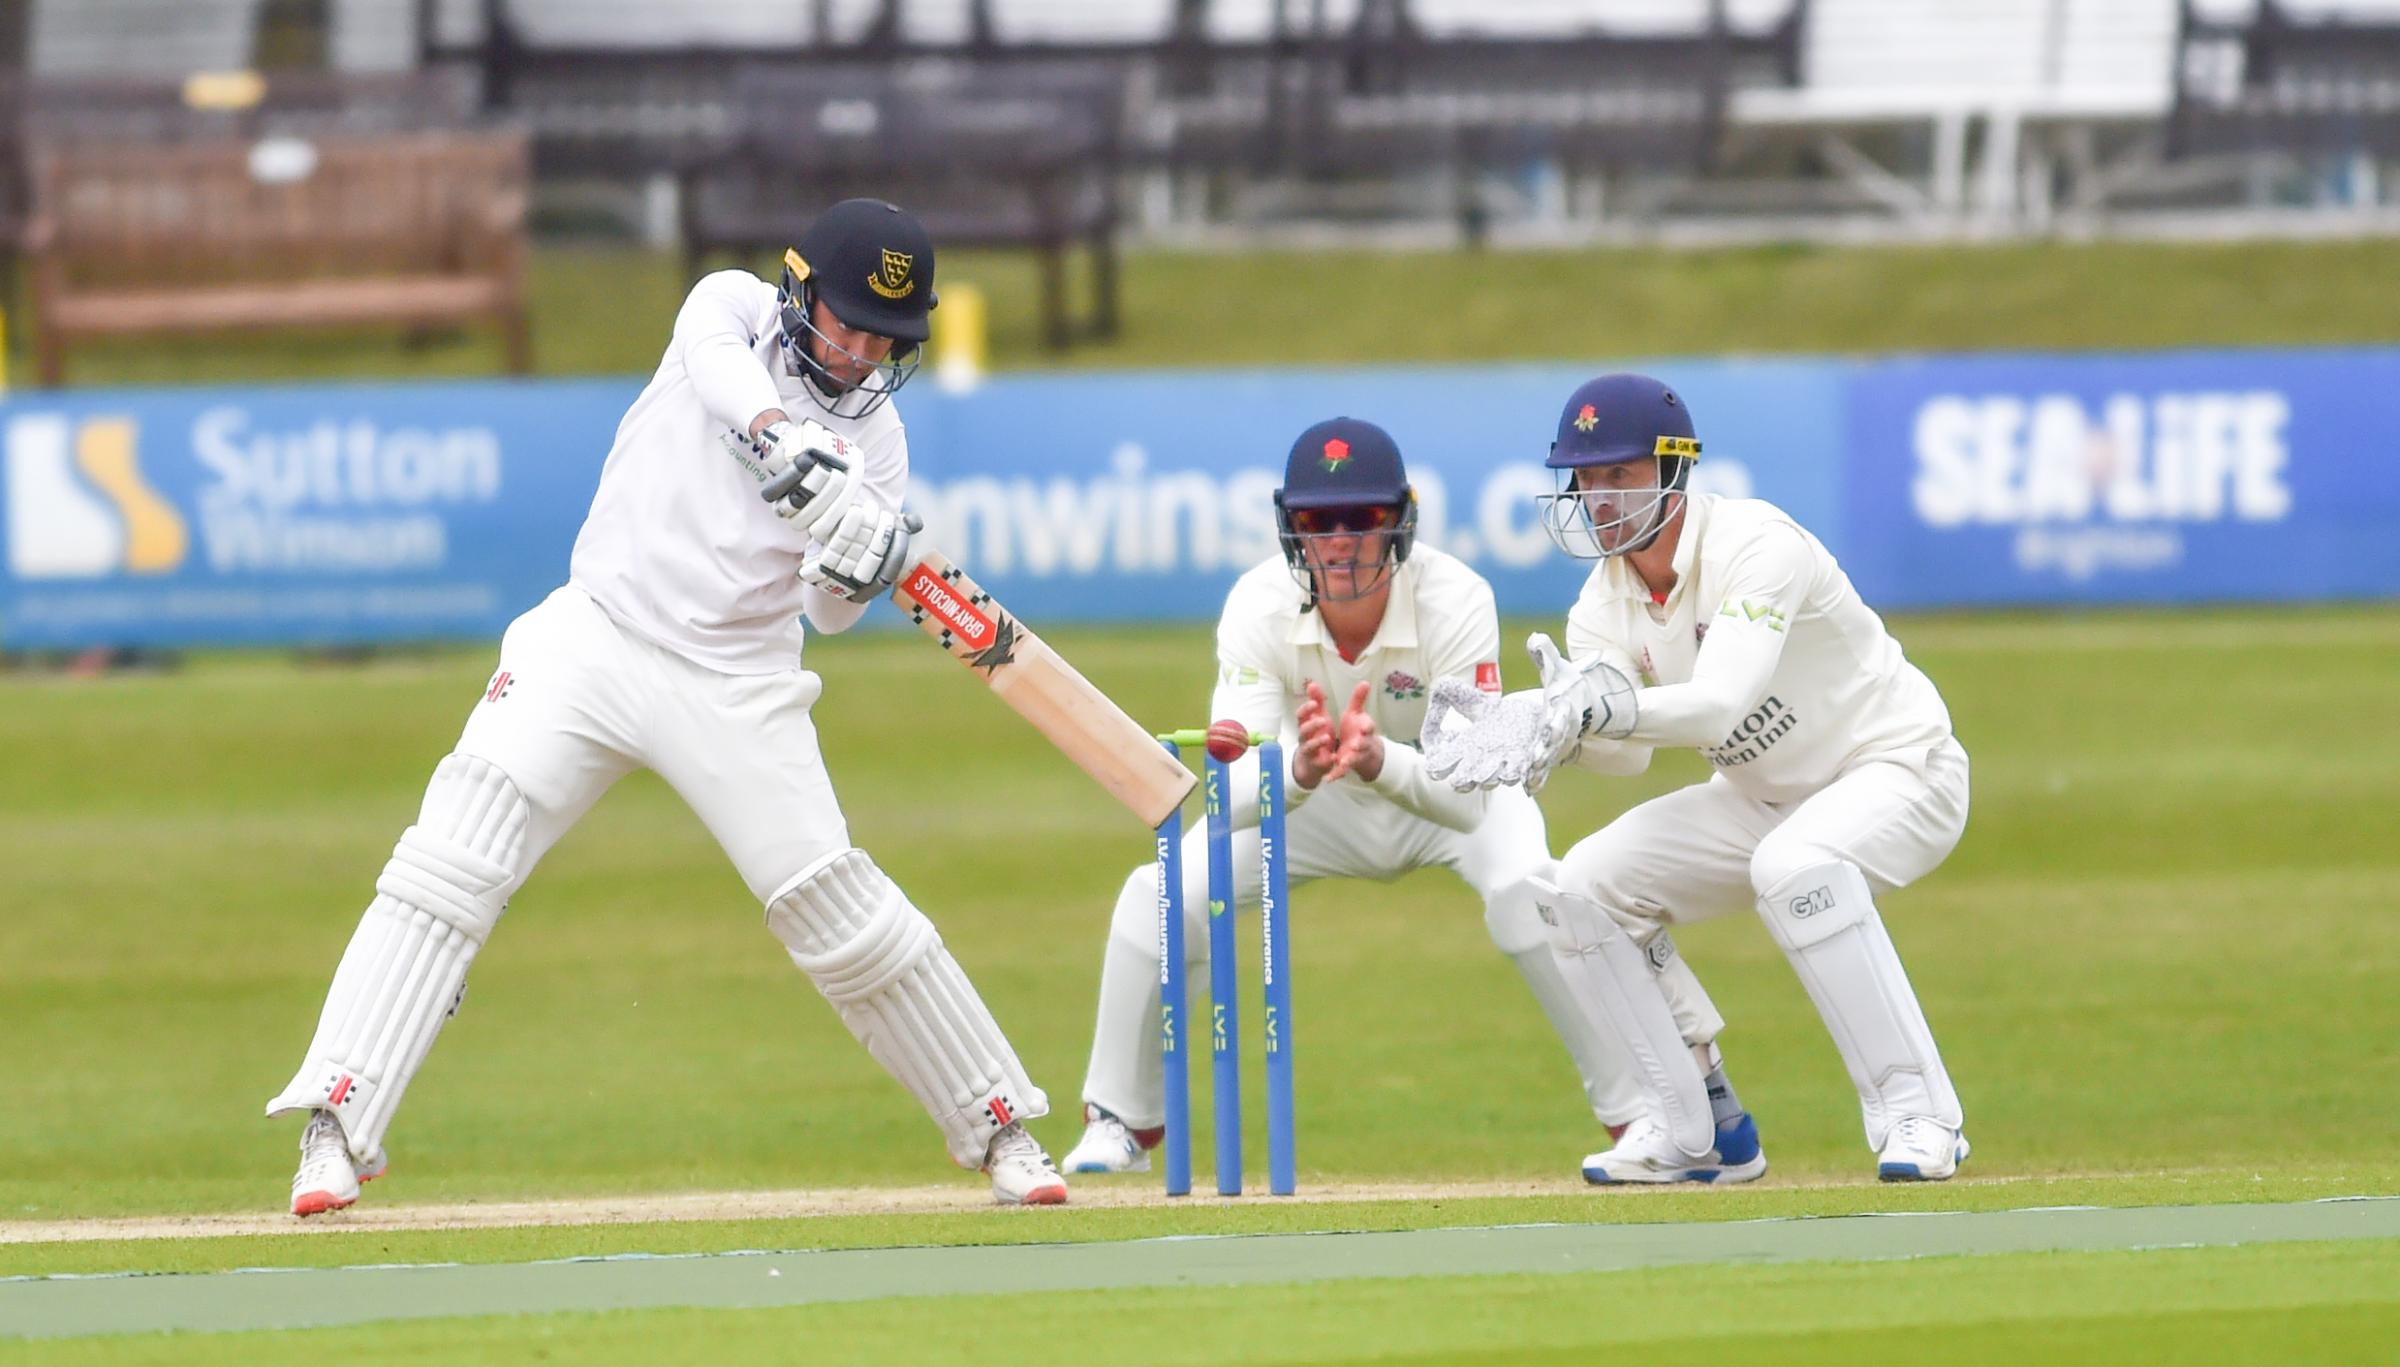 Hove UK 29th April 2021 - Tom Haines batting for Sussex against Lancashire on the first day of their LV= Insurance County Championship match at The 1st Central County Ground in Hove . : Credit Simon Dack / Alamy Live News......